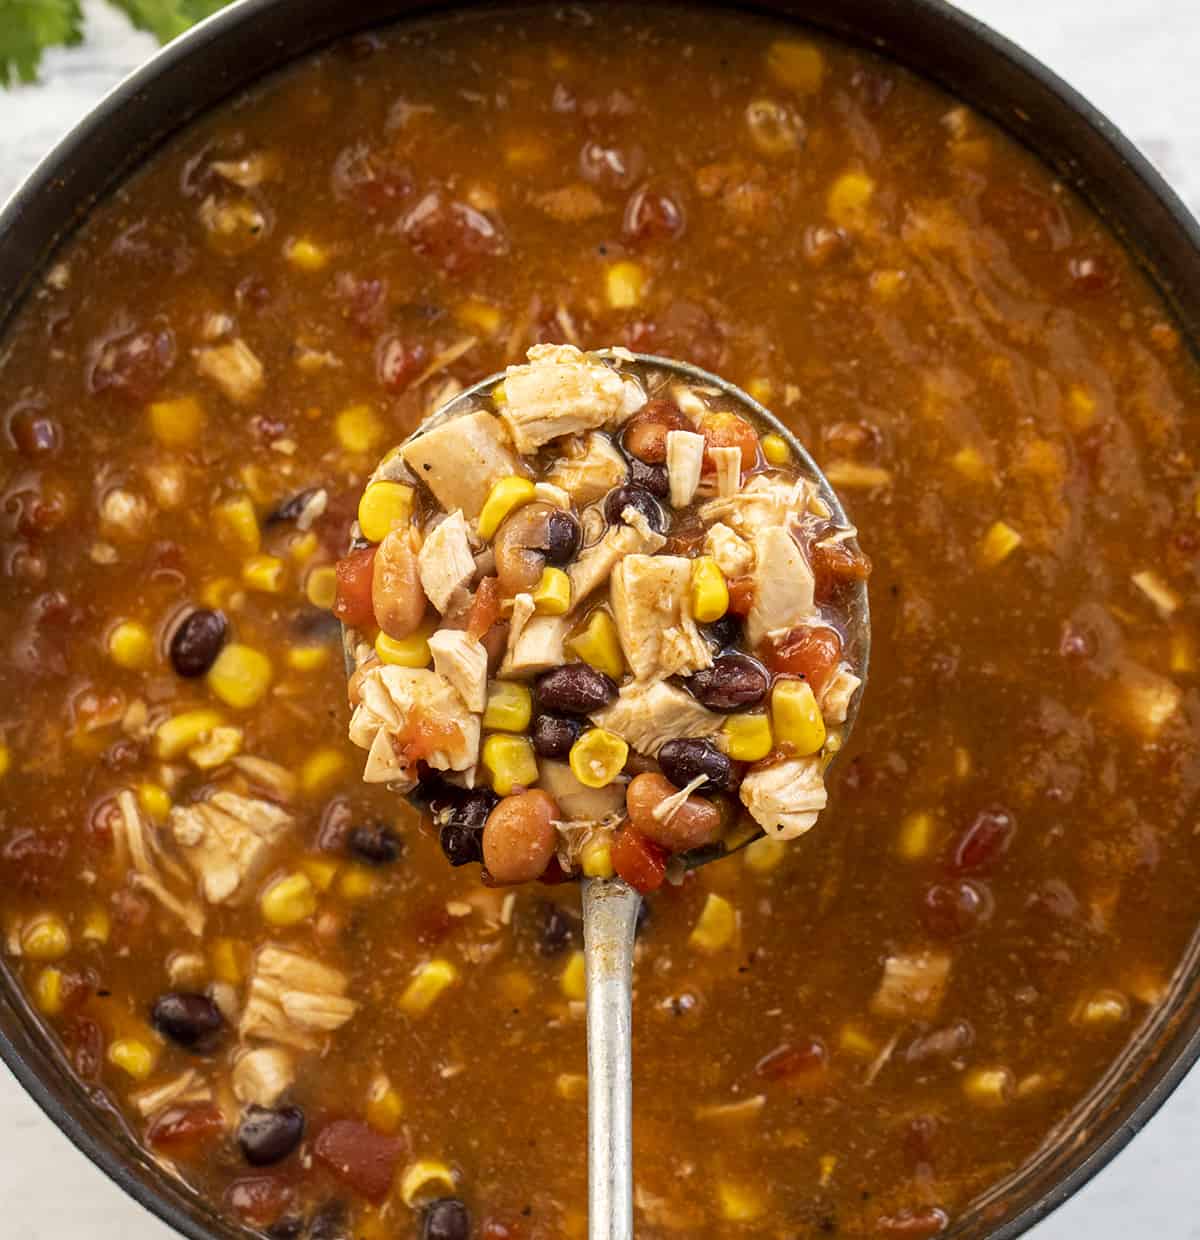 Ladle Above Pan Filled with 7 Can Chicken Taco Soup. Soup, Summer Soups, Easy Soups, Cheap Soup Recipes, Simple Soups, Chicken Taco Soup, Mexican Soup, Appetizer, Tortilla Chips, Thick Soups, Dinner, Chicken Recipes, recipes, i am homesteader, iamhomesteader